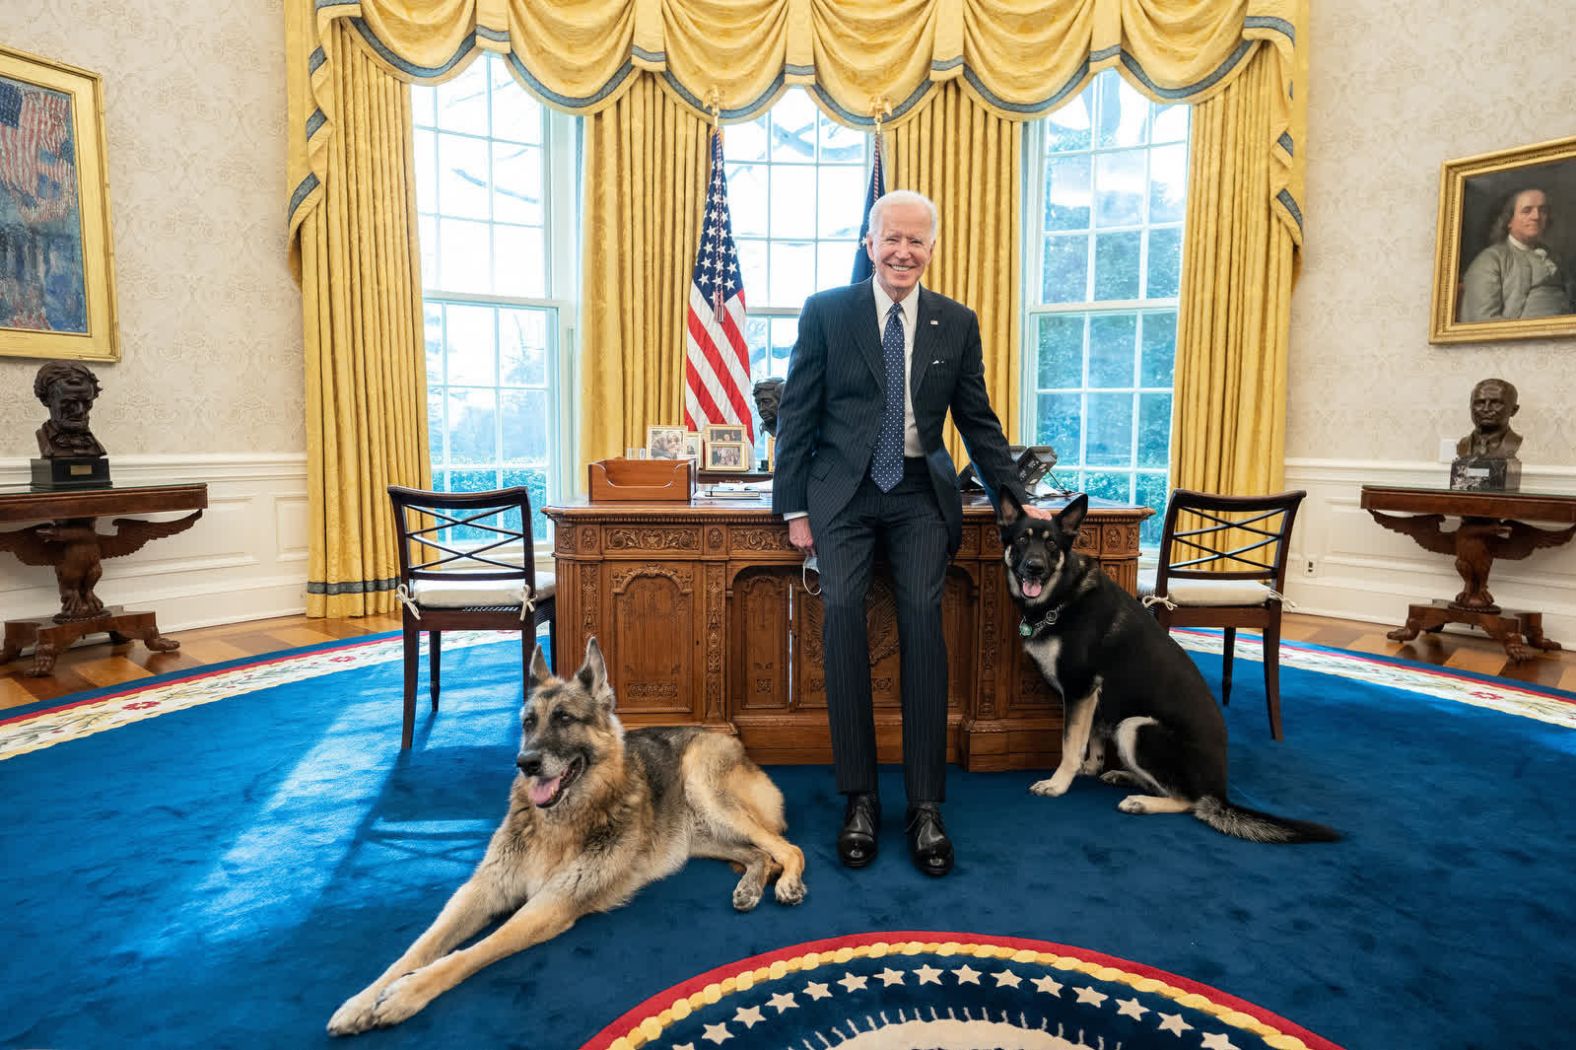 Biden poses with his dogs, Champ and Major, in the Oval Office in February 2021. The German shepherds marked a return to a <a href="index.php?page=&url=http%3A%2F%2Fwww.cnn.com%2F2013%2F08%2F20%2Fpolitics%2Fgallery%2Fpresidential-pets%2Findex.html" target="_blank">longstanding tradition</a> of Presidents and their families bringing their pets with them to the White House. <a href="index.php?page=&url=https%3A%2F%2Fwww.cnn.com%2F2021%2F06%2F19%2Fpolitics%2Fchamp-biden-german-shepherd-dog-dies%2Findex.html" target="_blank">Champ died</a> in June 2021 at the age of 13.